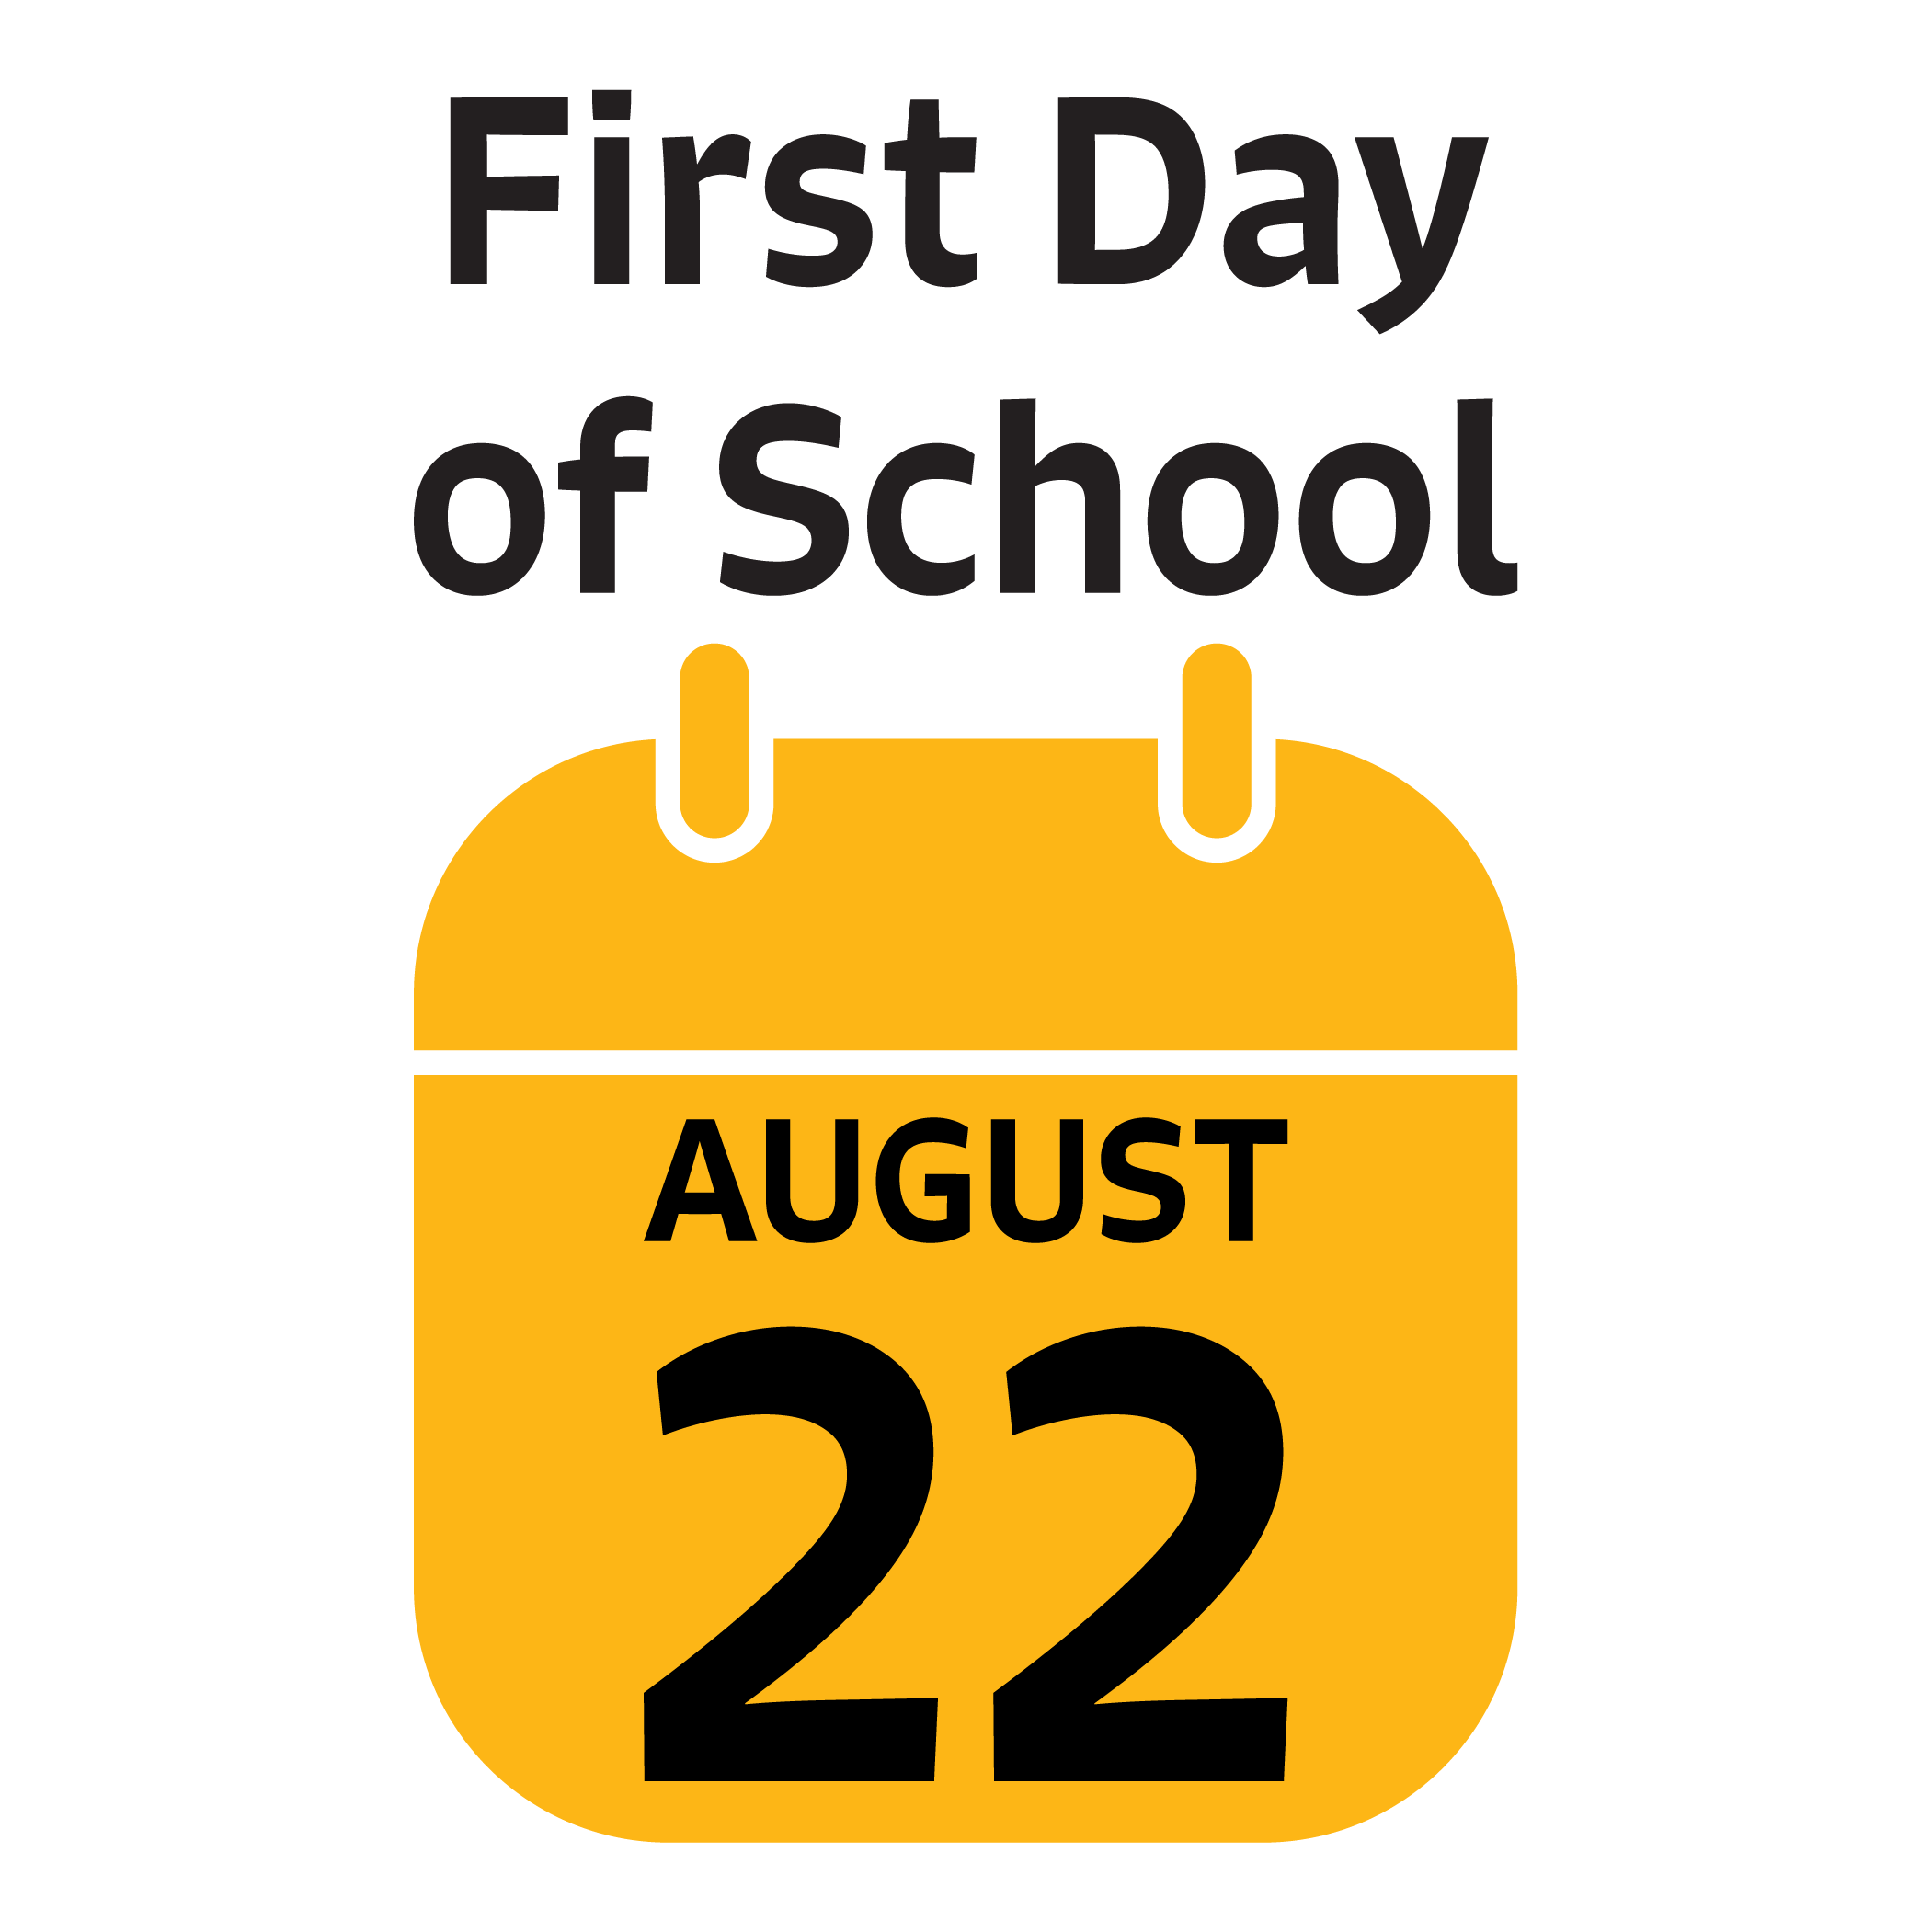 First Day of School August 22